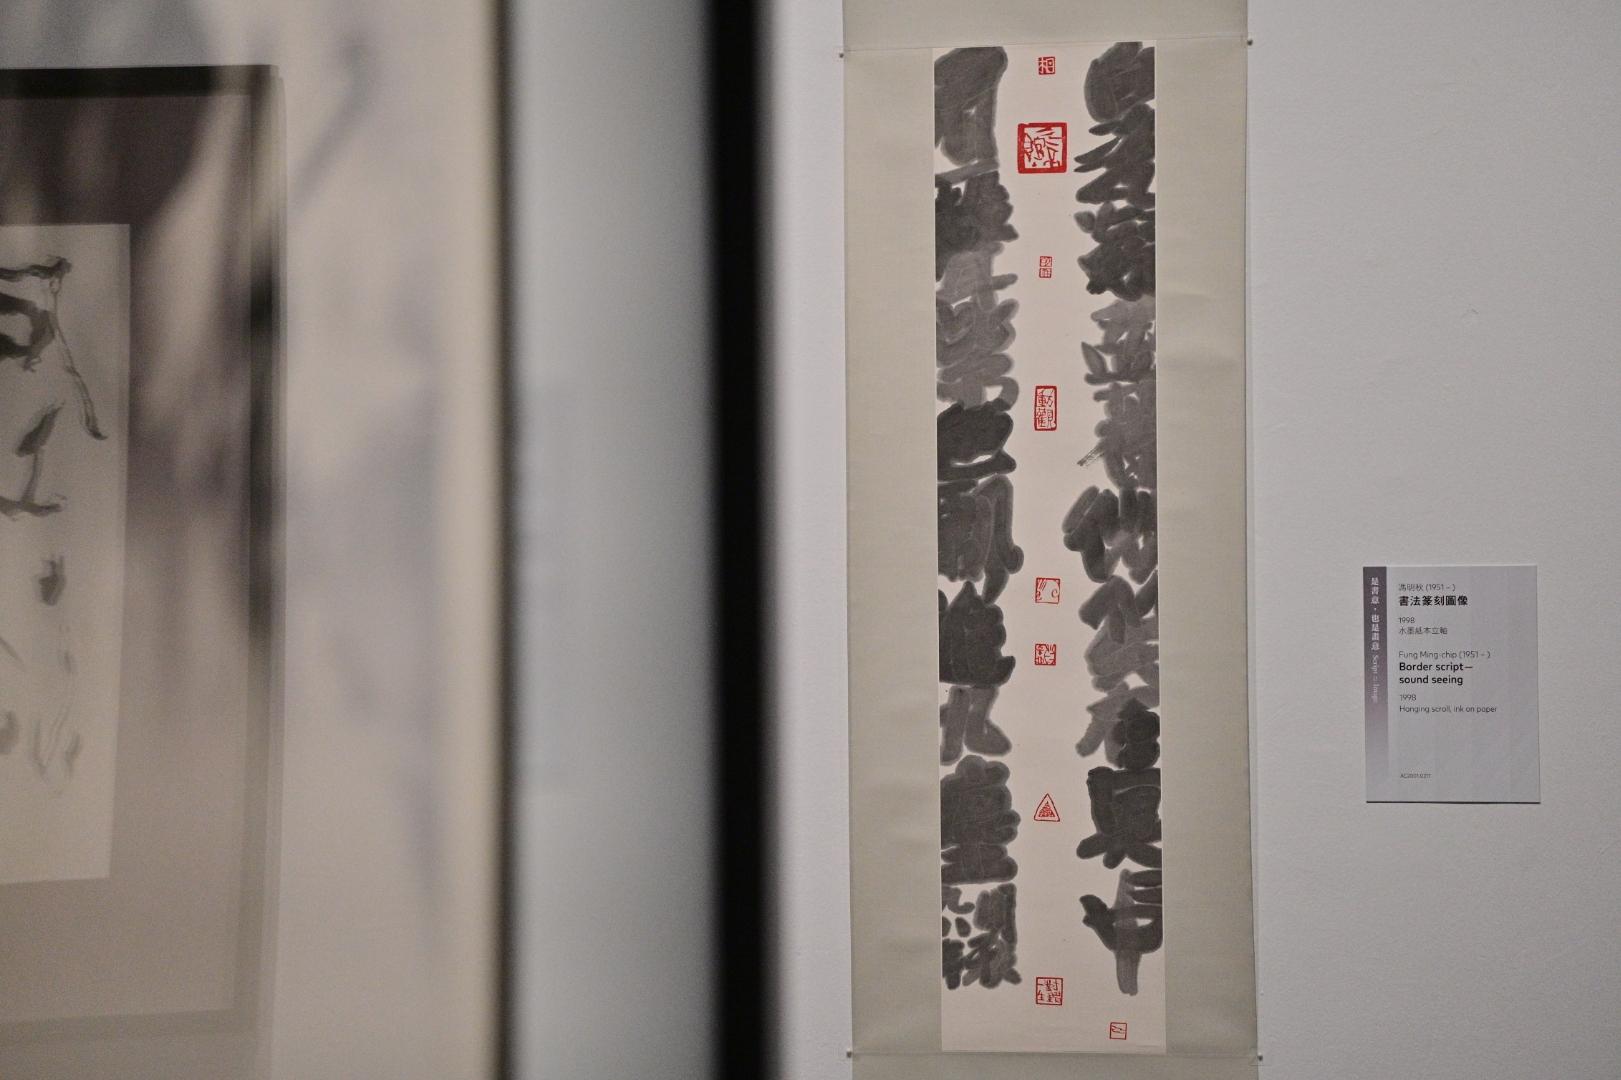 The "City Rhymes: The Melodious Notes of Calligraphy" exhibition will be held from tomorrow (July 22) at the Hong Kong Museum of Art. Photo shows Fung Ming-chip's "Border script - sound seeing" (right).